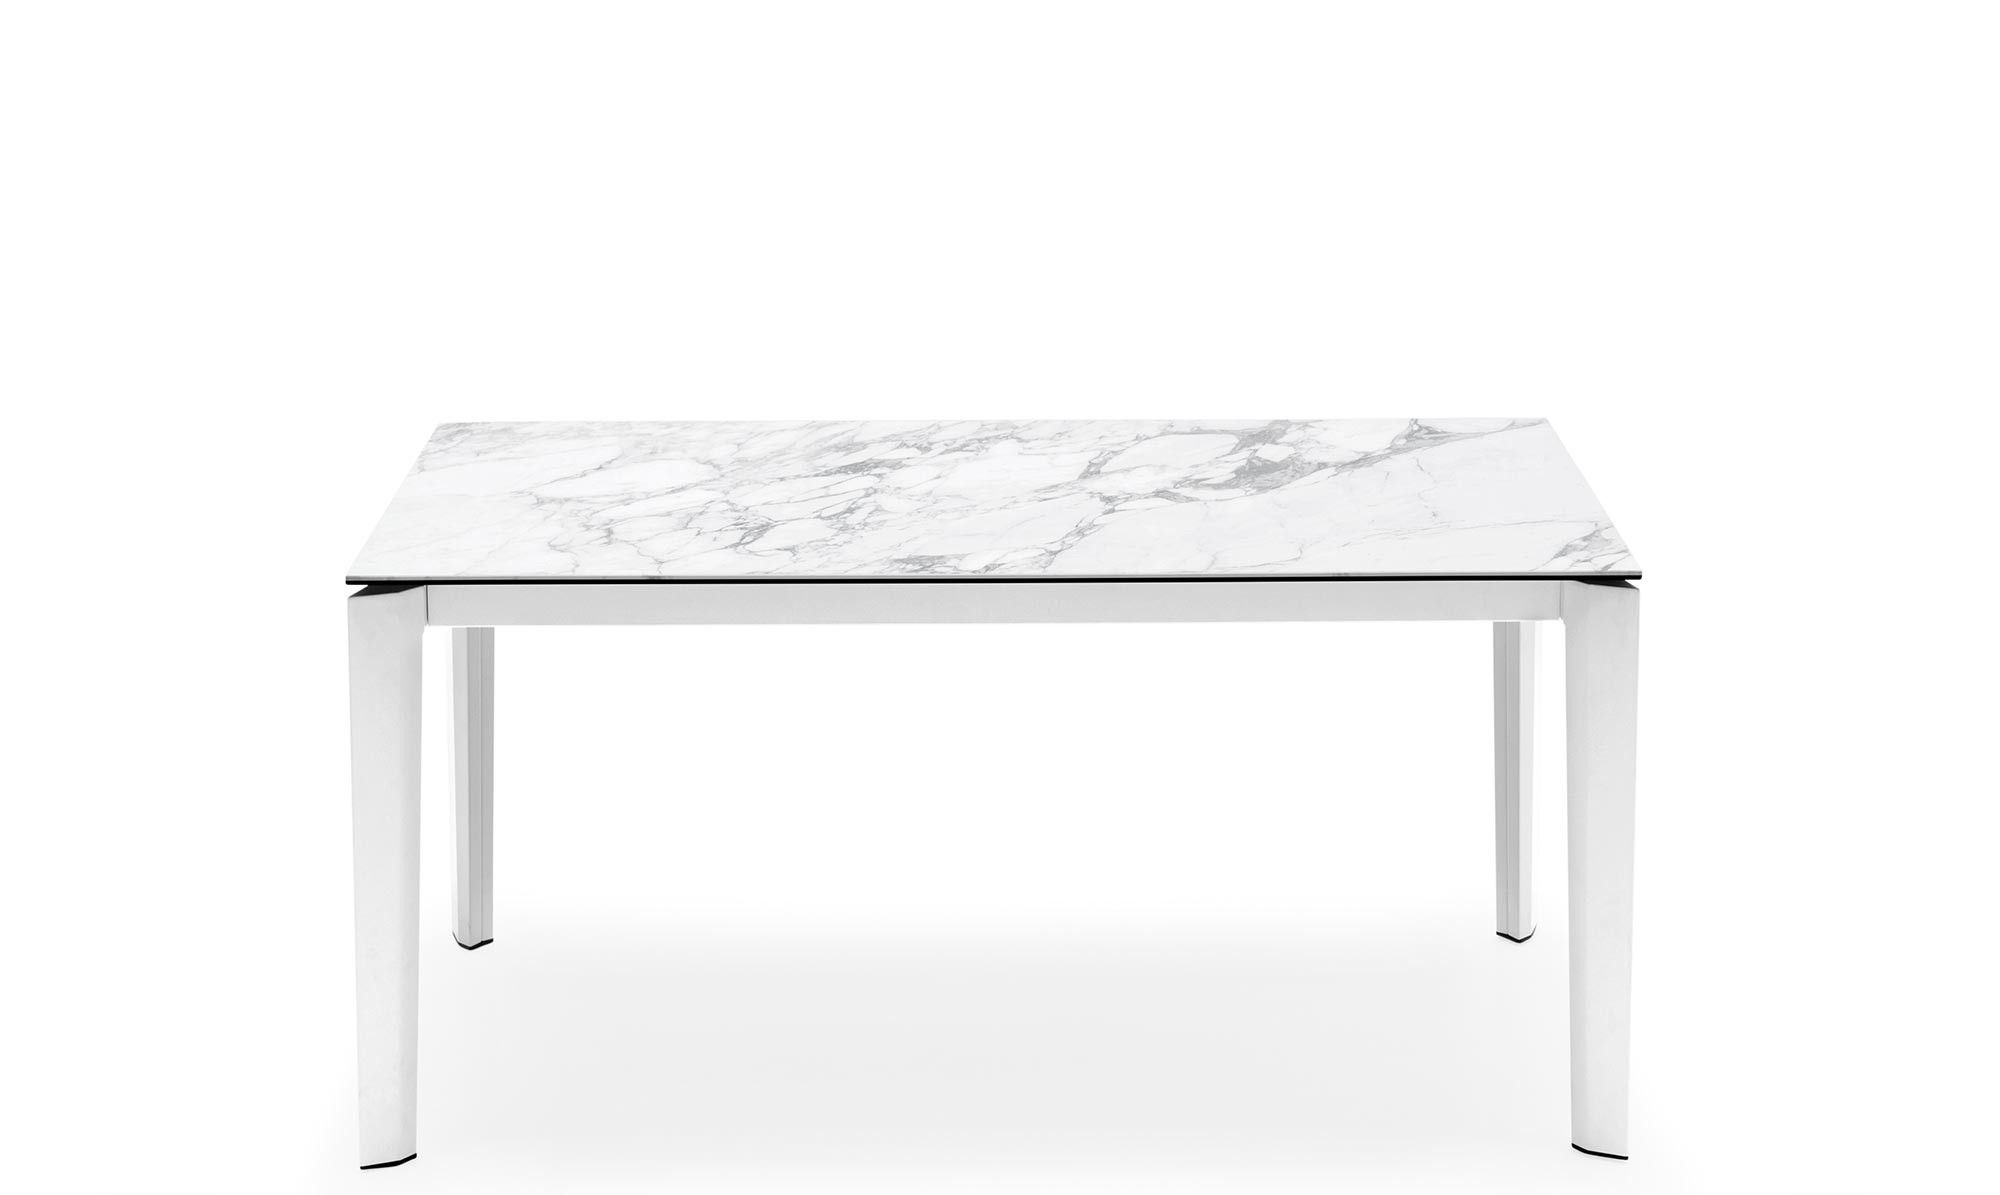 Calligaris Delta – Cs/4097 Mv Ext Dining Table White Marble Ceramic Pertaining To 2019 Dining Tables With White Marble Top (View 10 of 25)